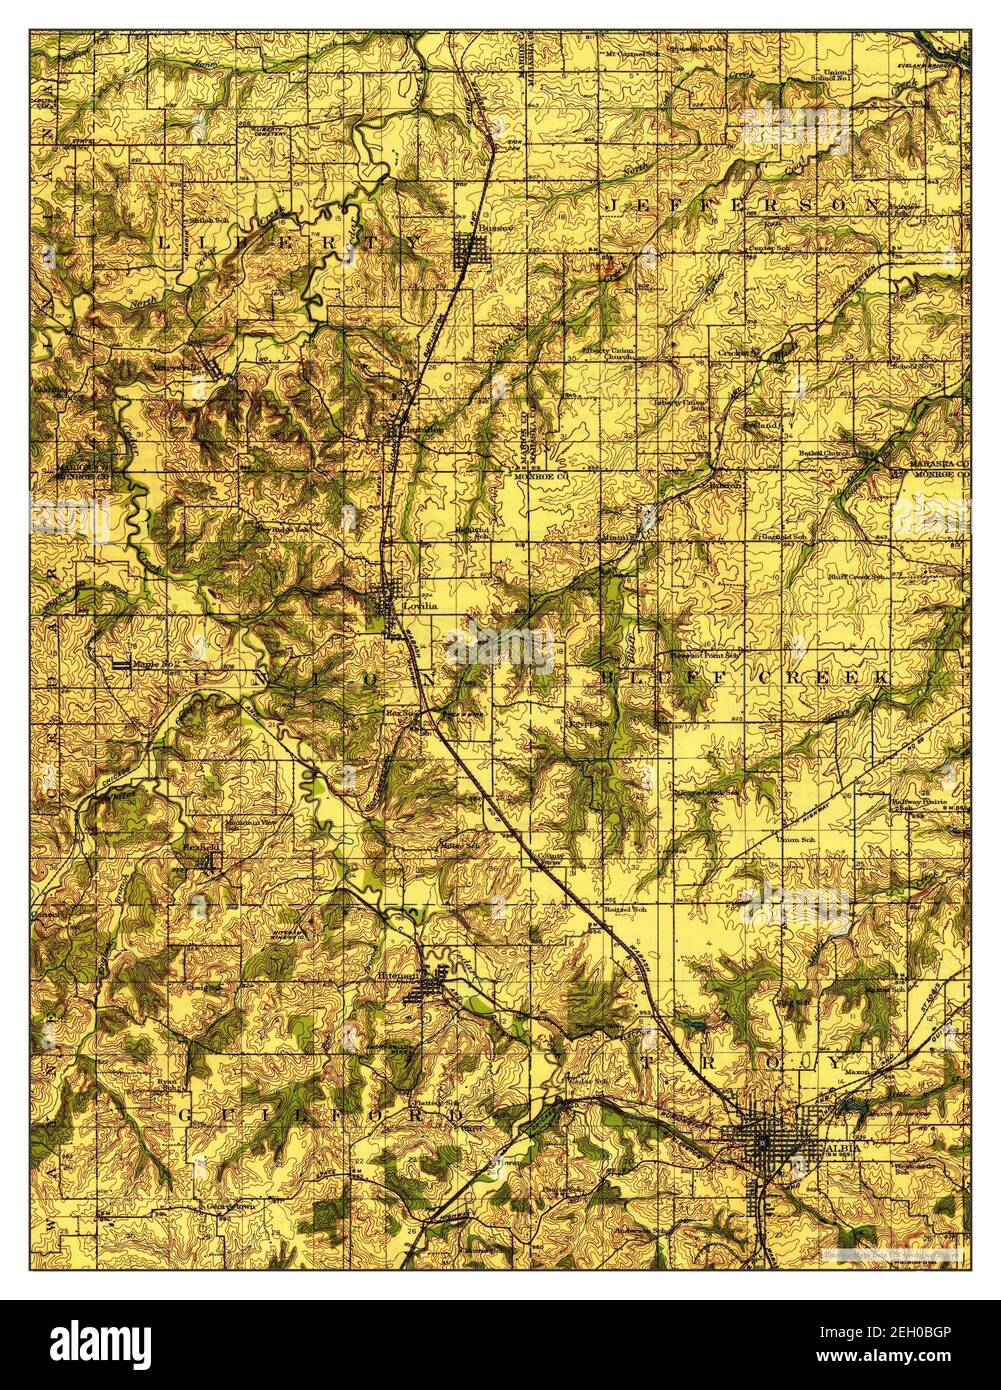 Albia, Iowa, map 1929, 1:62500, United States of America by Timeless Maps, data U.S. Geological Survey Stock Photo